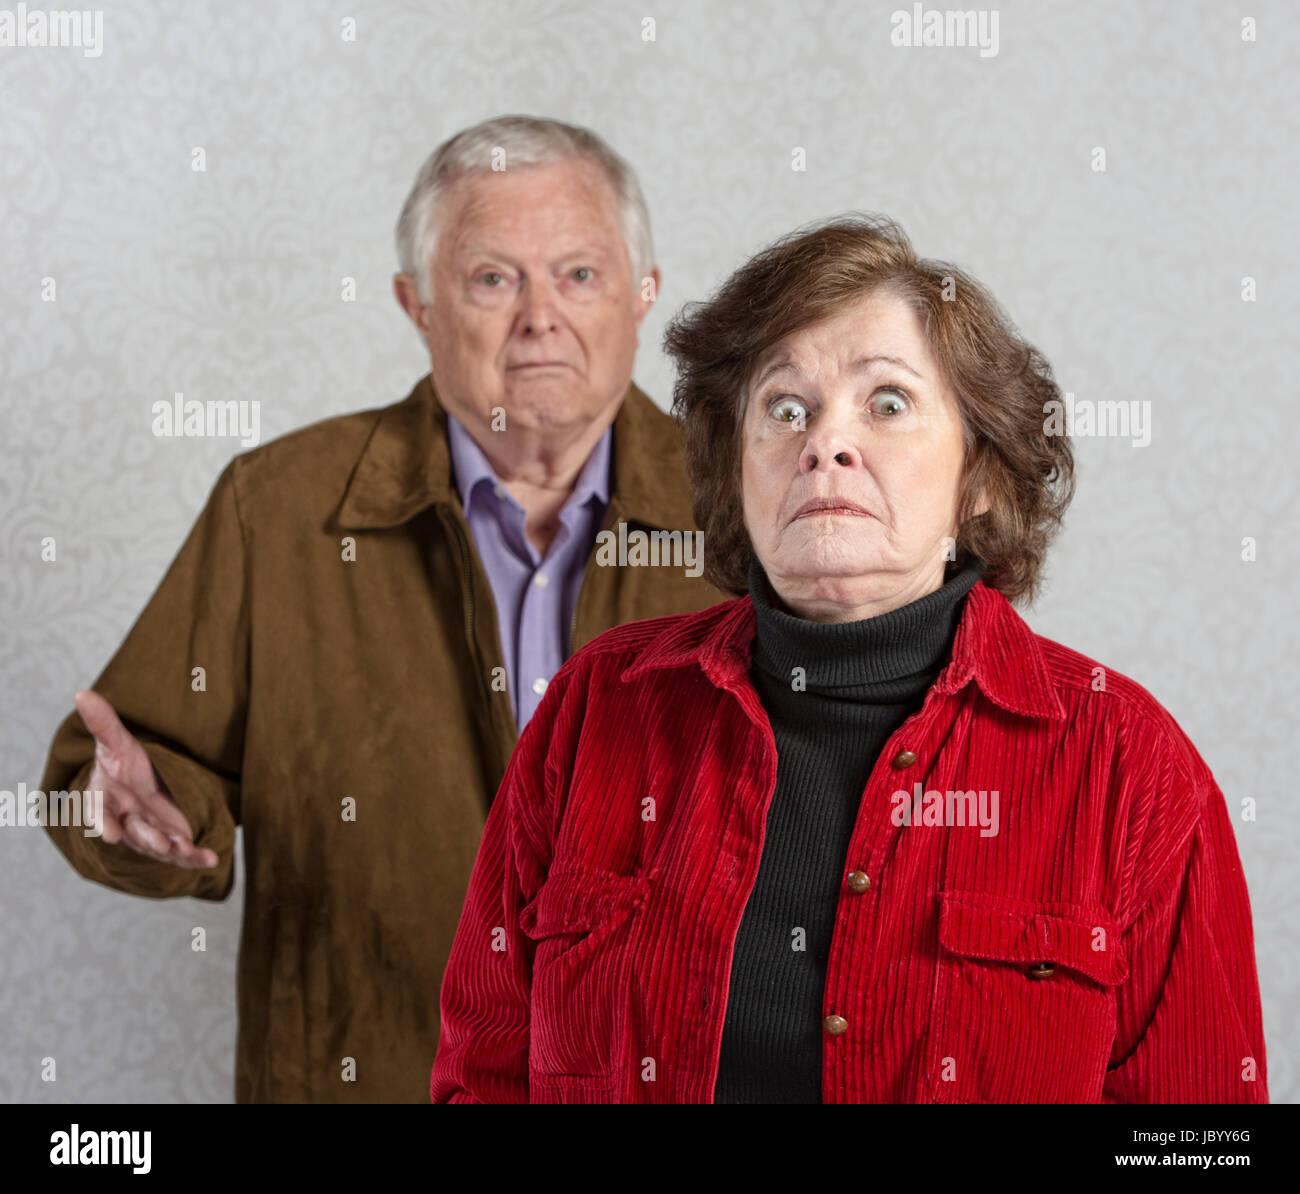 Stiff older woman in front of confused man Stock Photo